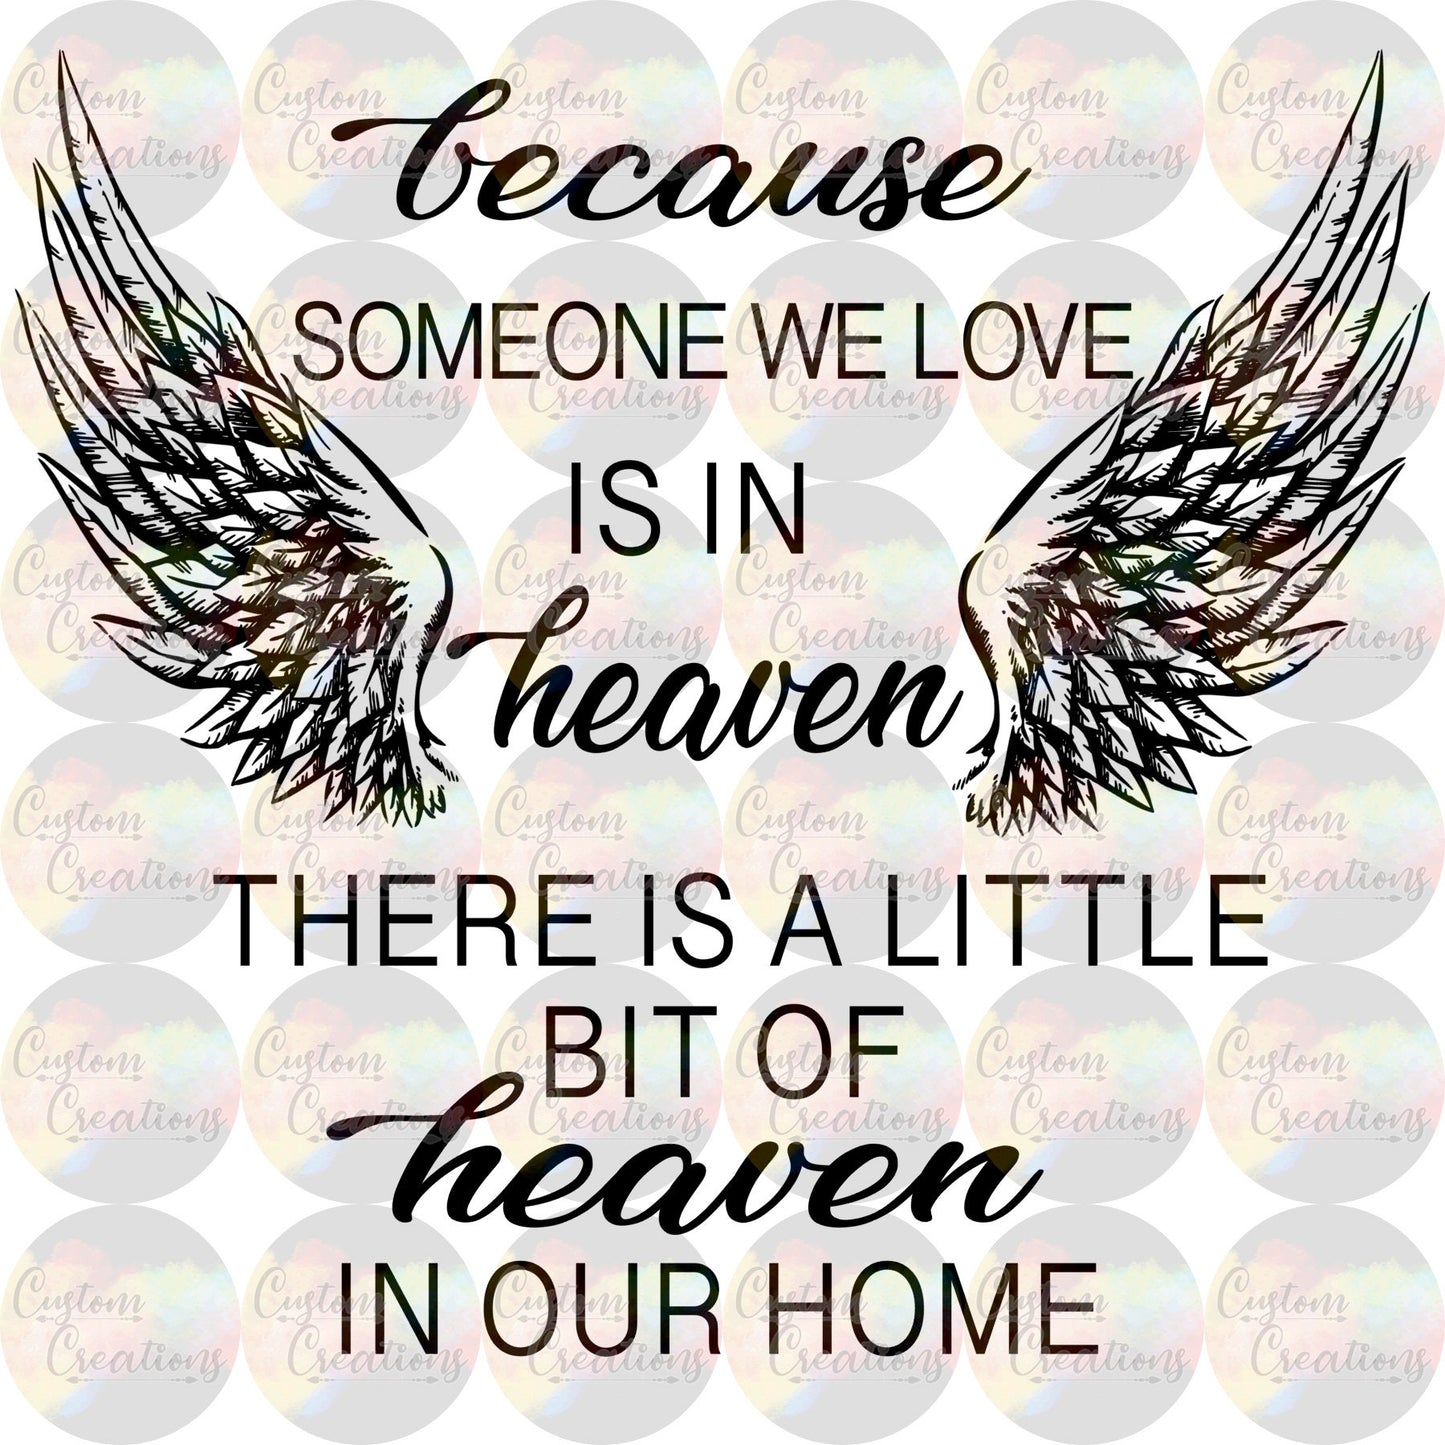 Because Someone We Love is In Heaven A Little Bit of Heaven Is In Our Home  3.5" Clear Laser Printed Waterslide